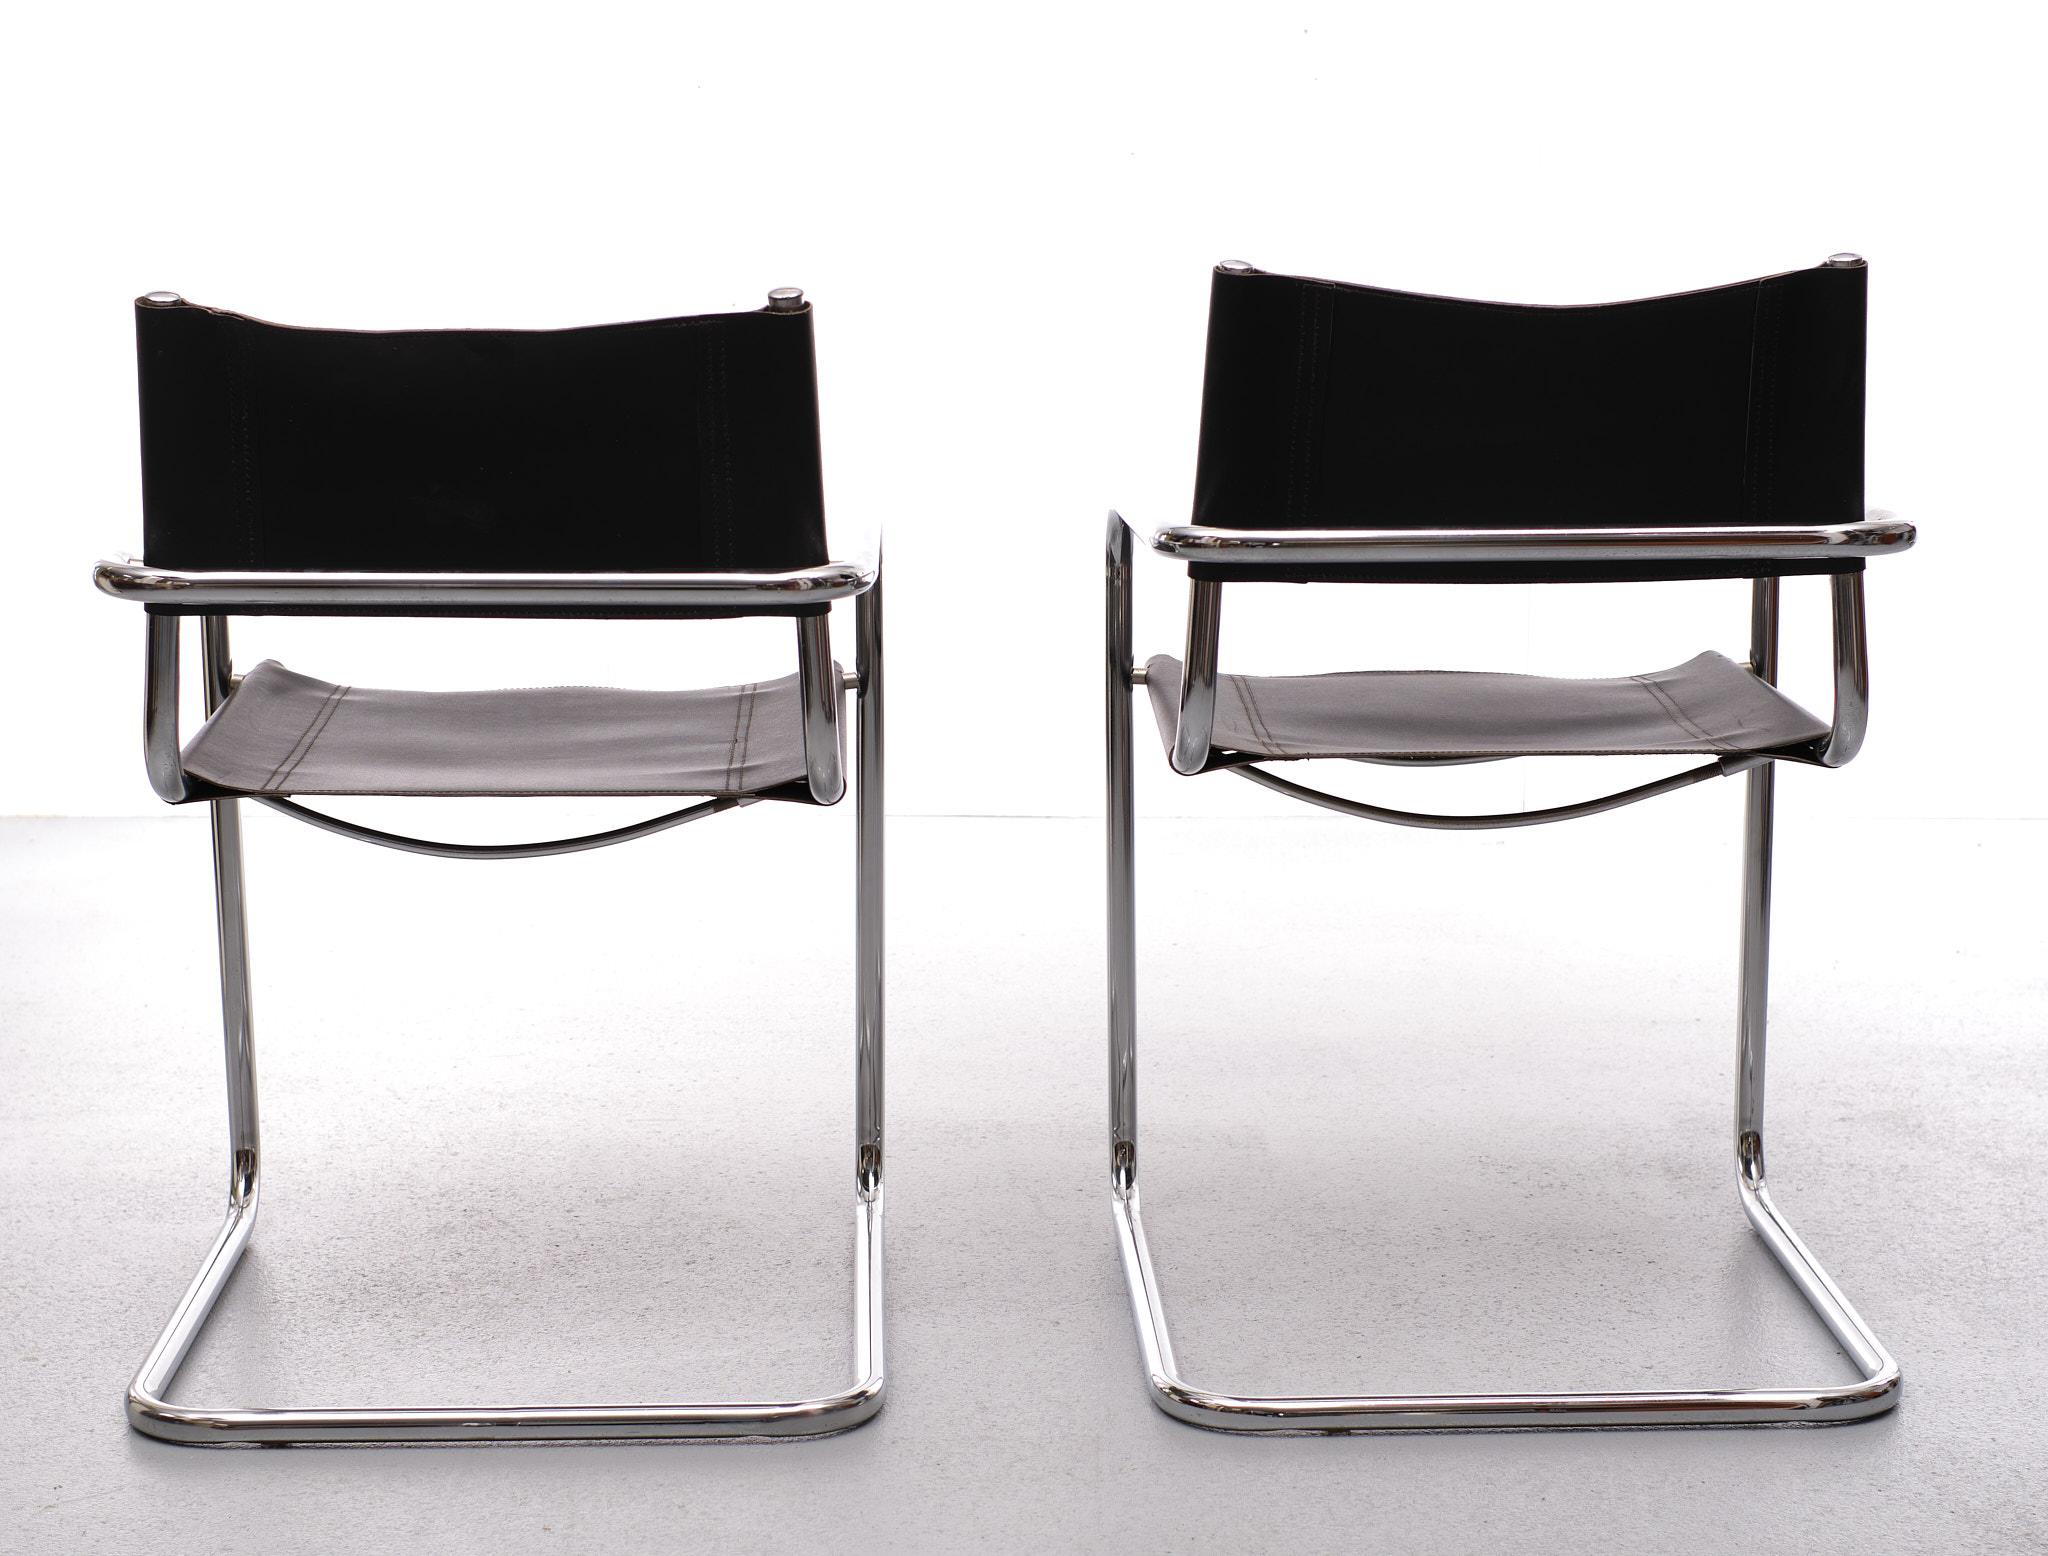 B34 Cantilever Chairs, Marcel Breuer Design, Bauhaus Chairs, Italy 80 For Sale 2